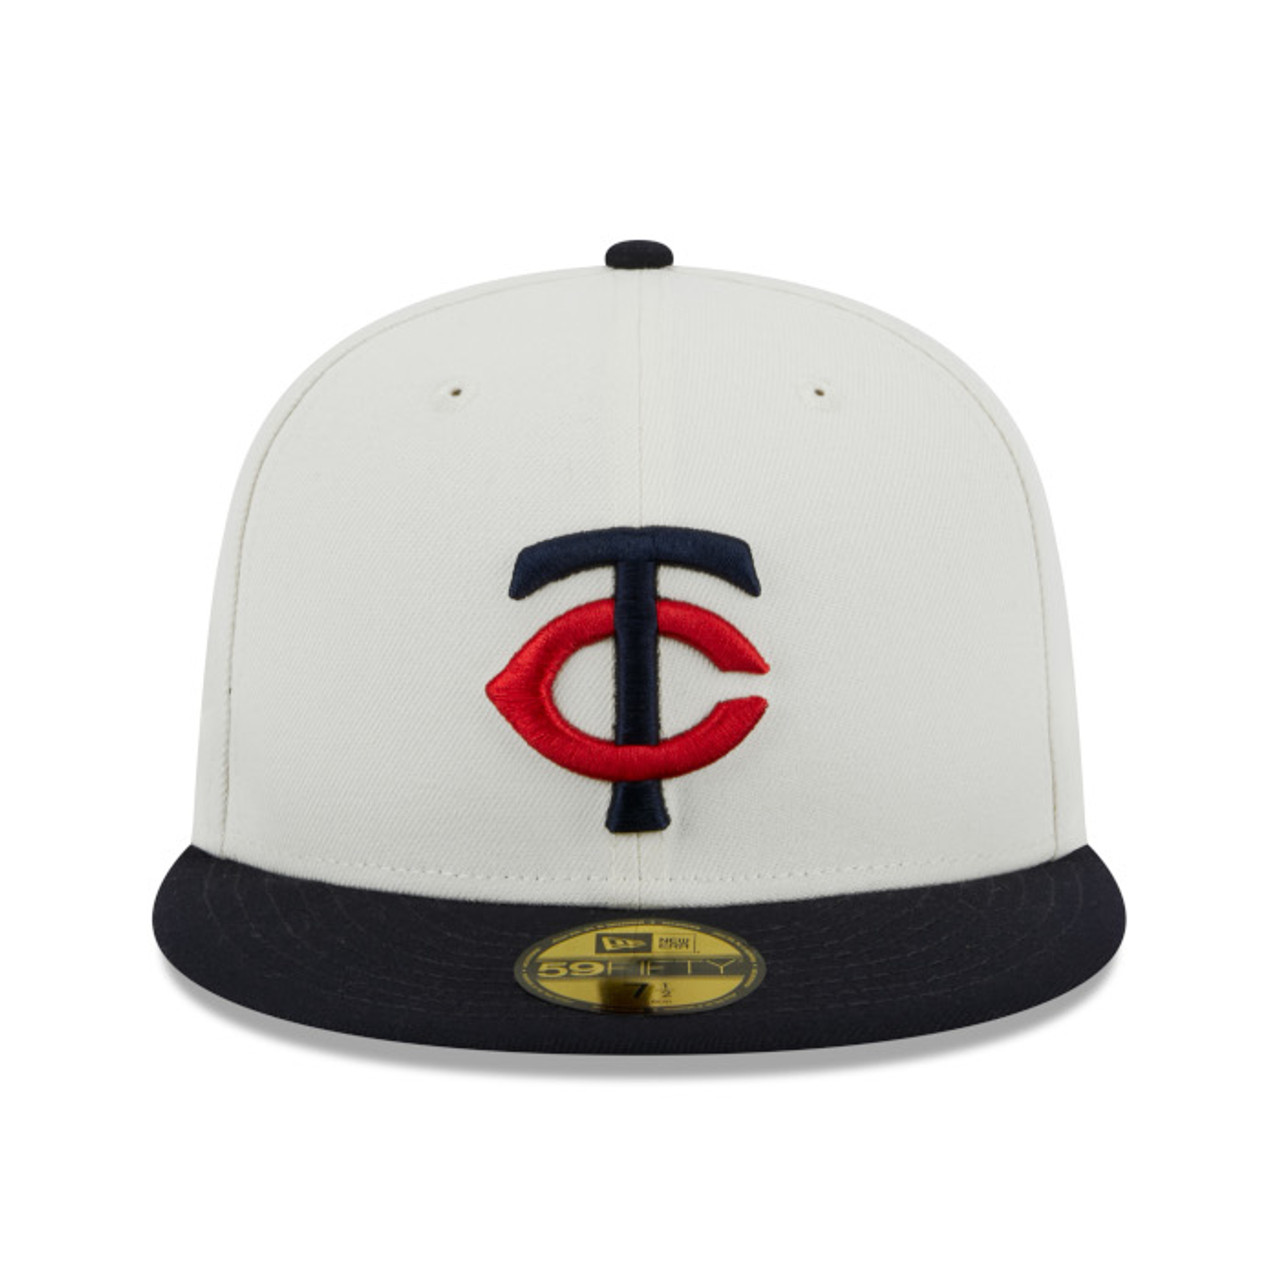 Men's Stitches White Minnesota Twins Cooperstown Collection